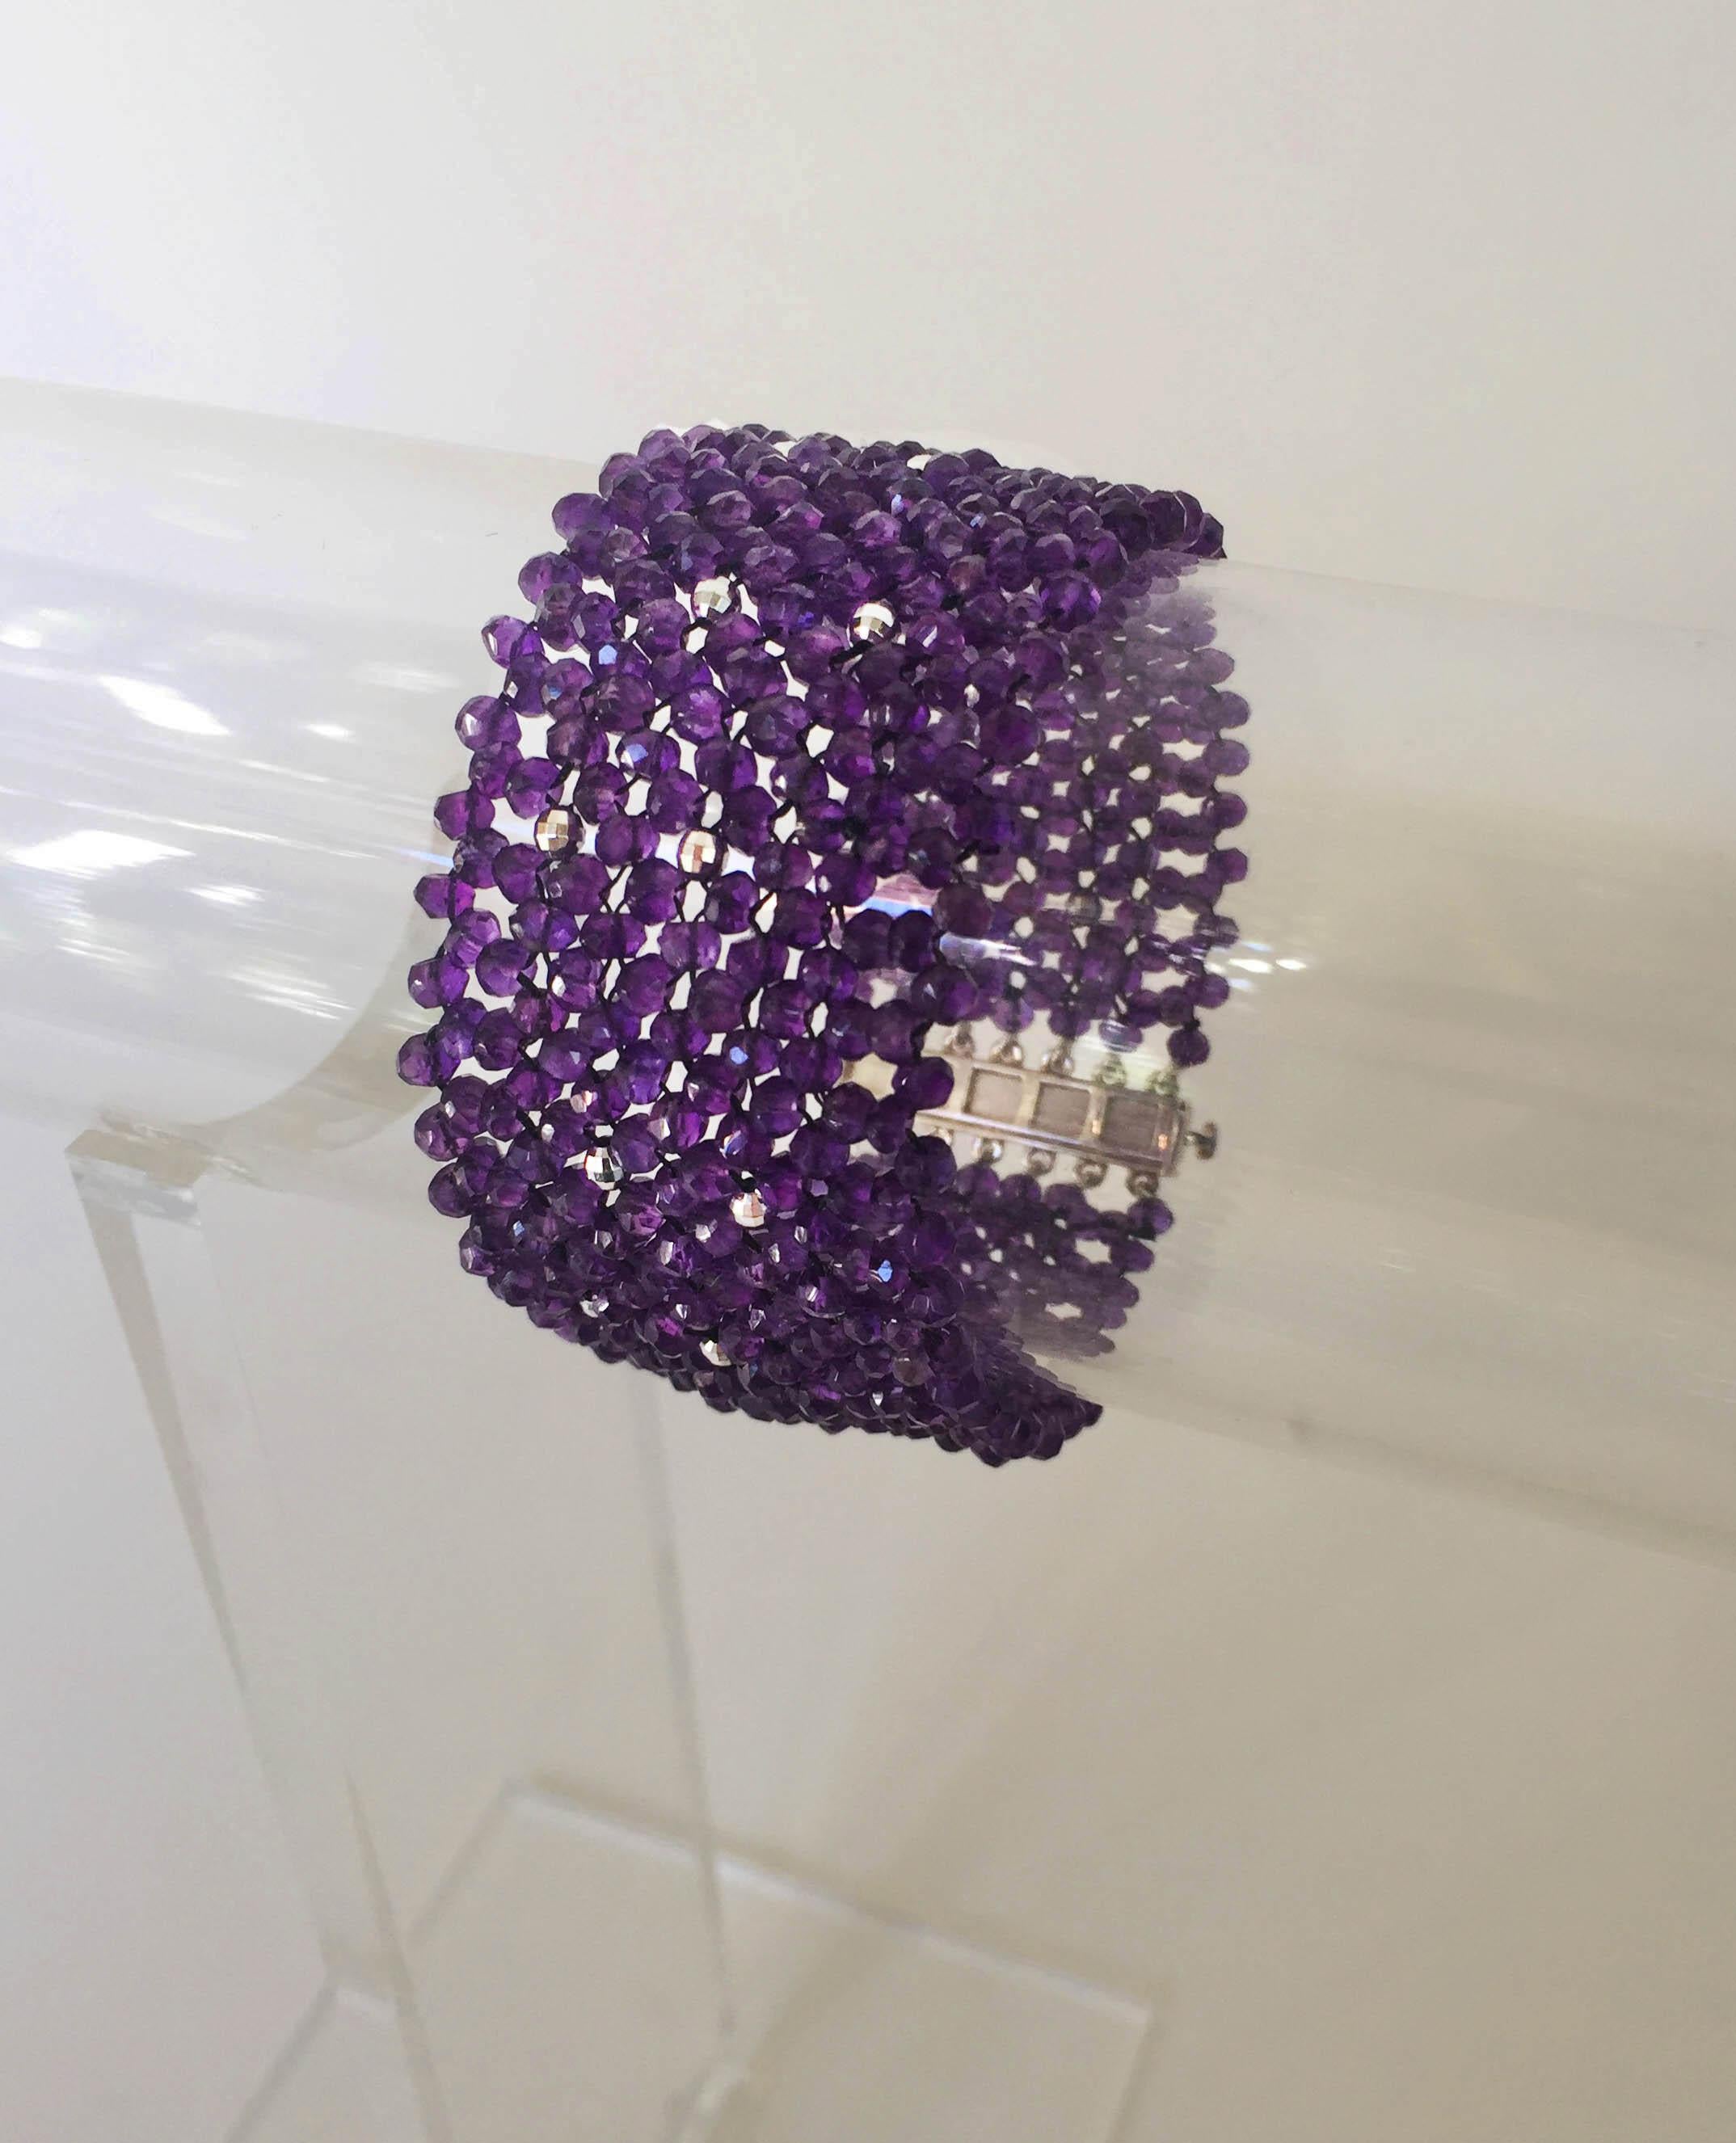 The woven faceted amethyst cuff bracelet with sterling silver clasp and beads is a beautiful shade of deep purple. At 1.25 inches wide and 7.15 inches long this bracelet gracefully drapes the wrist. The rhodium plated silver beads twinkle throughout